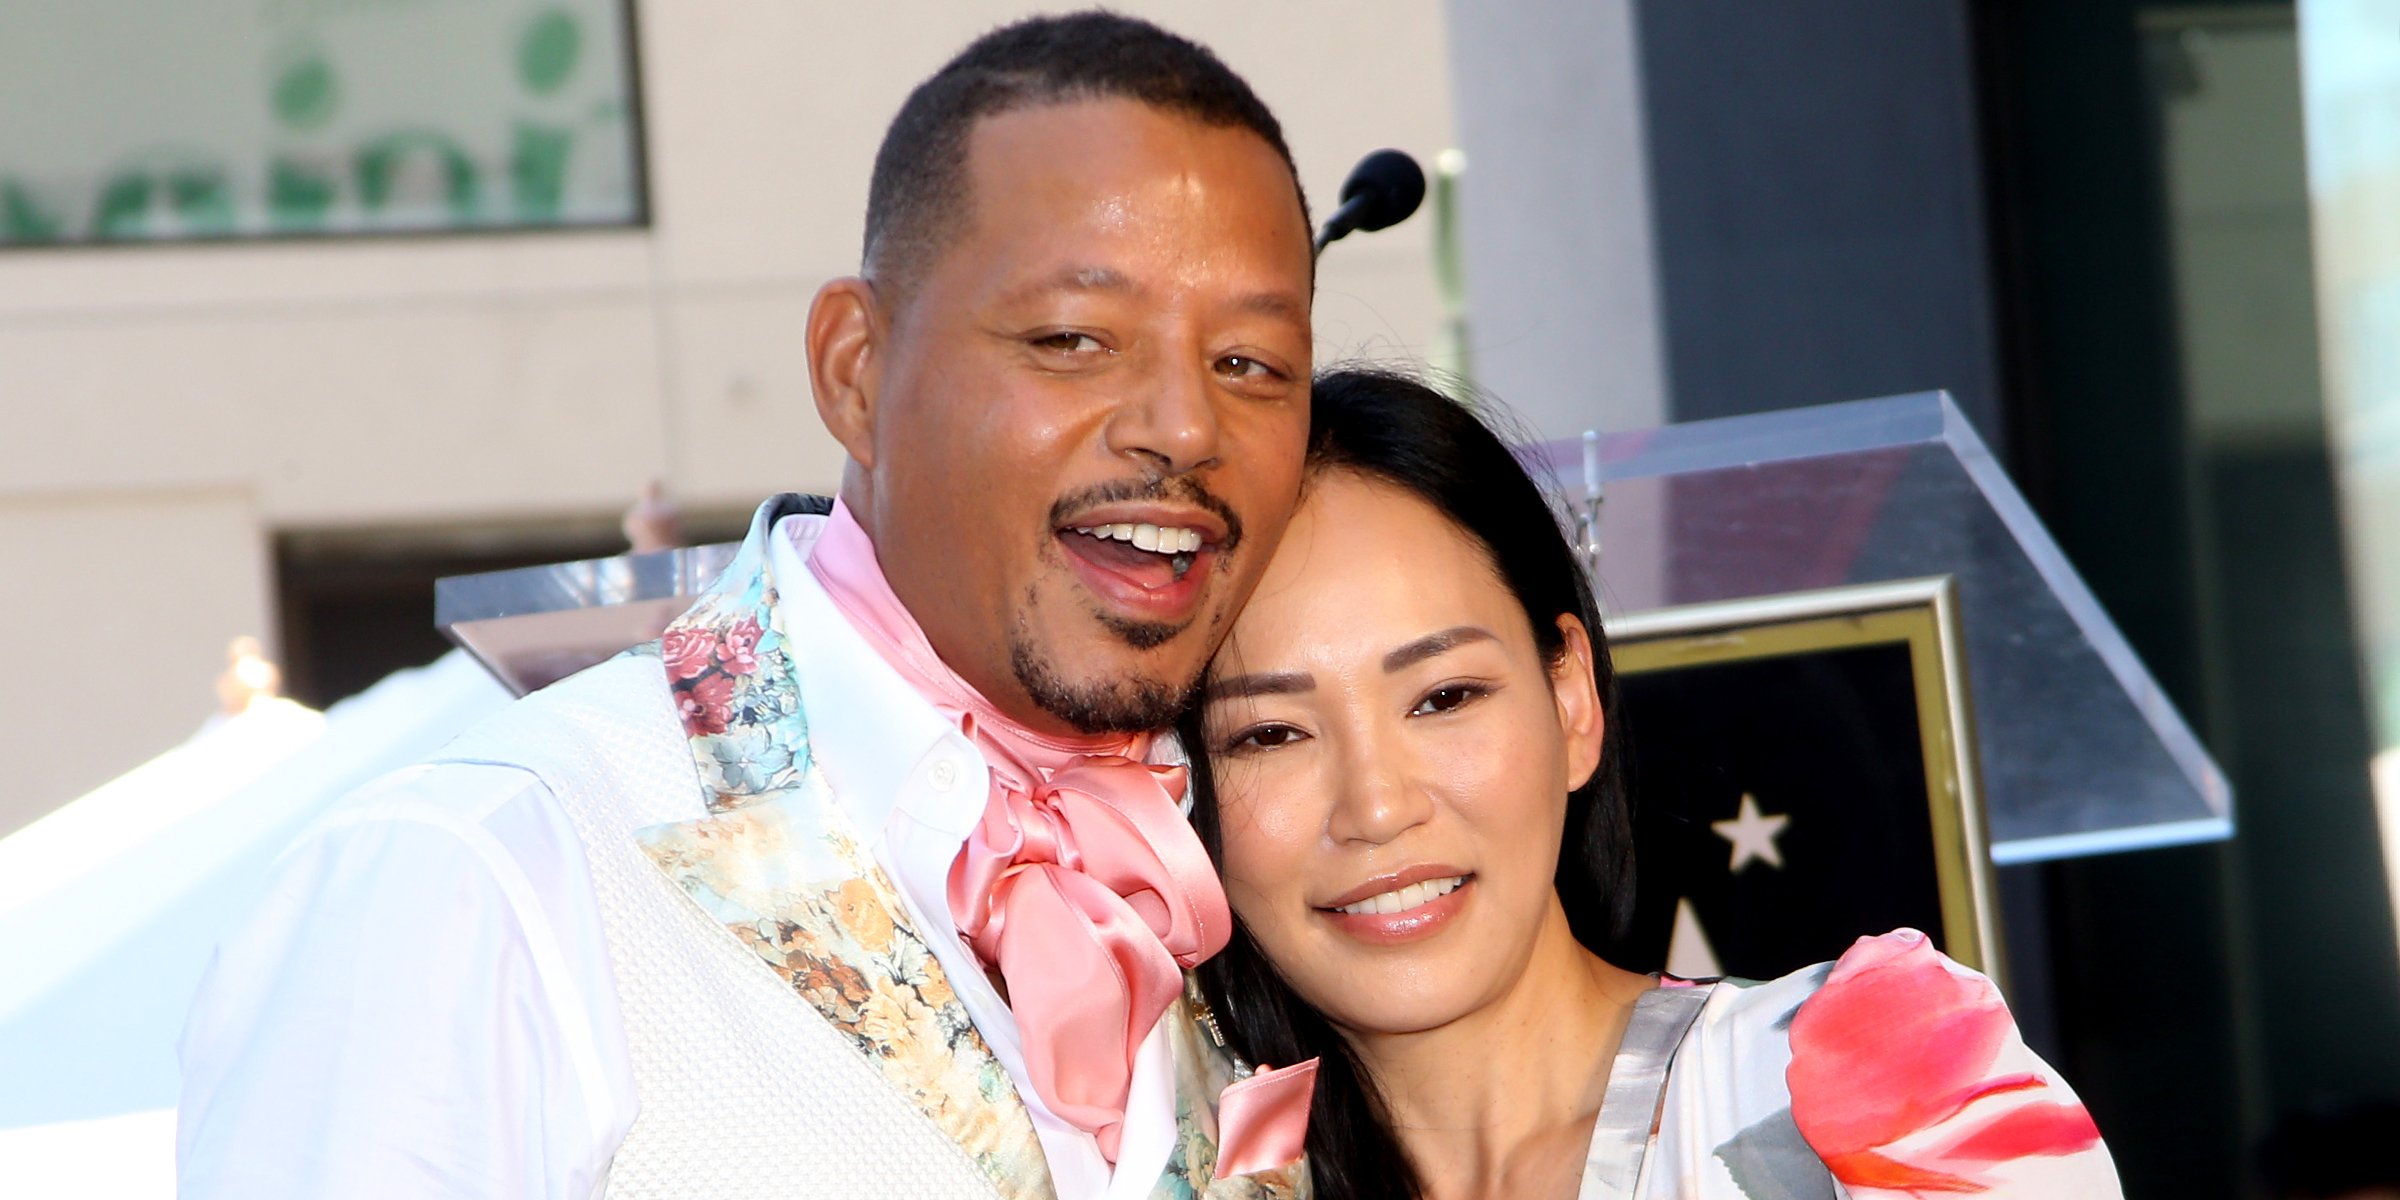 Terrence Howard and Mira Pak. | Source: Getty Images